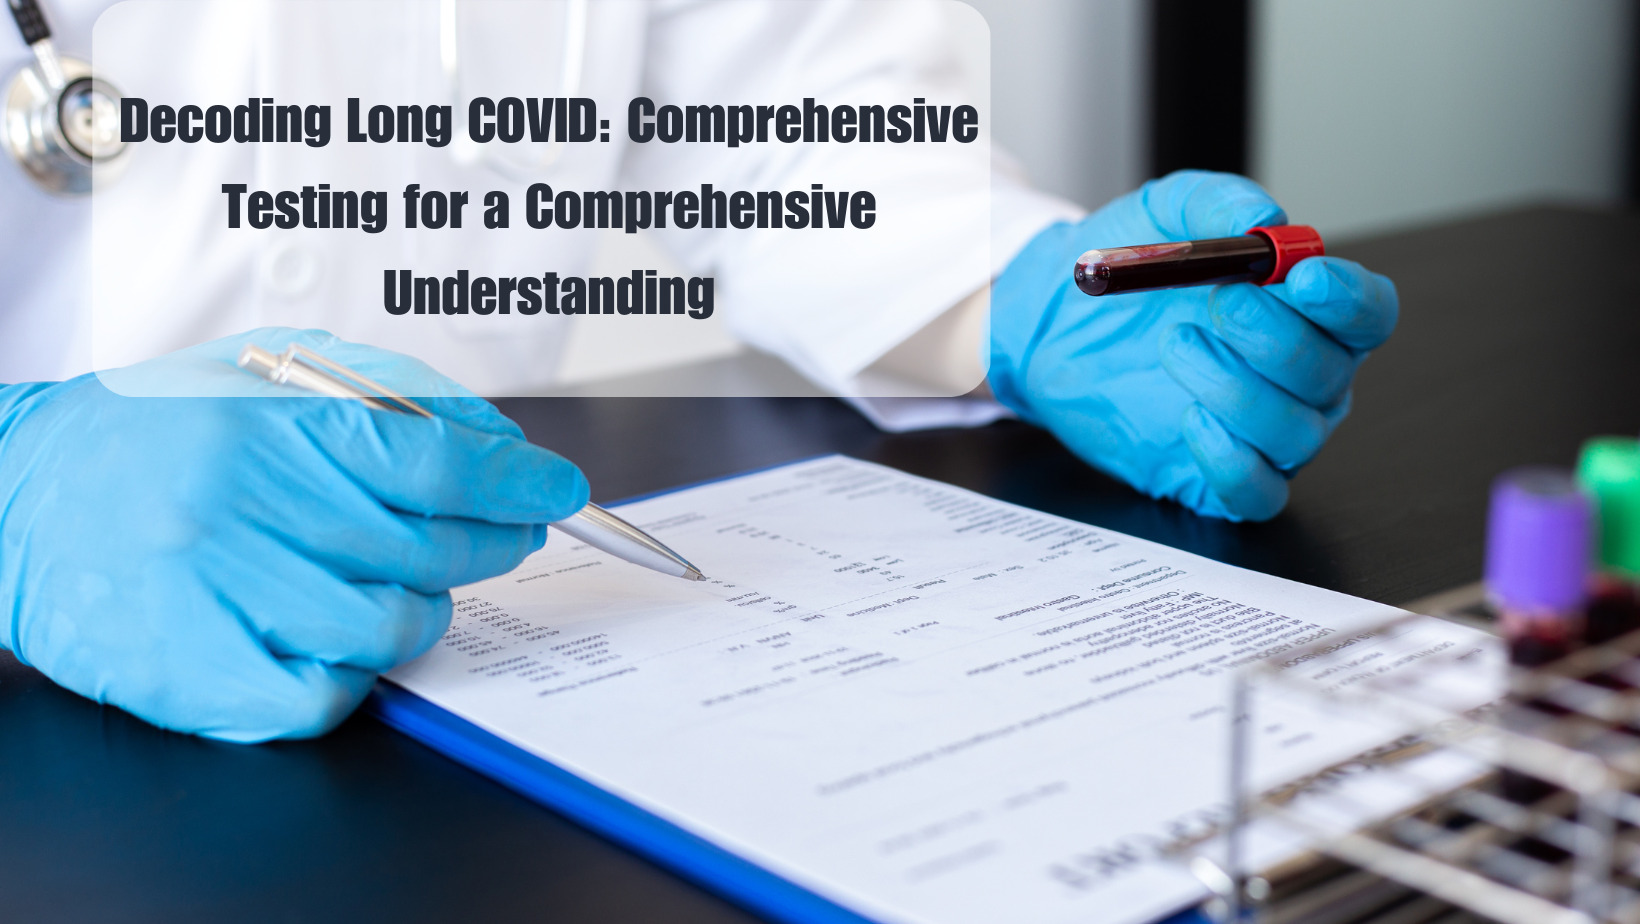 Decoding Long COVID: Comprehensive Testing for a Comprehensive Understanding